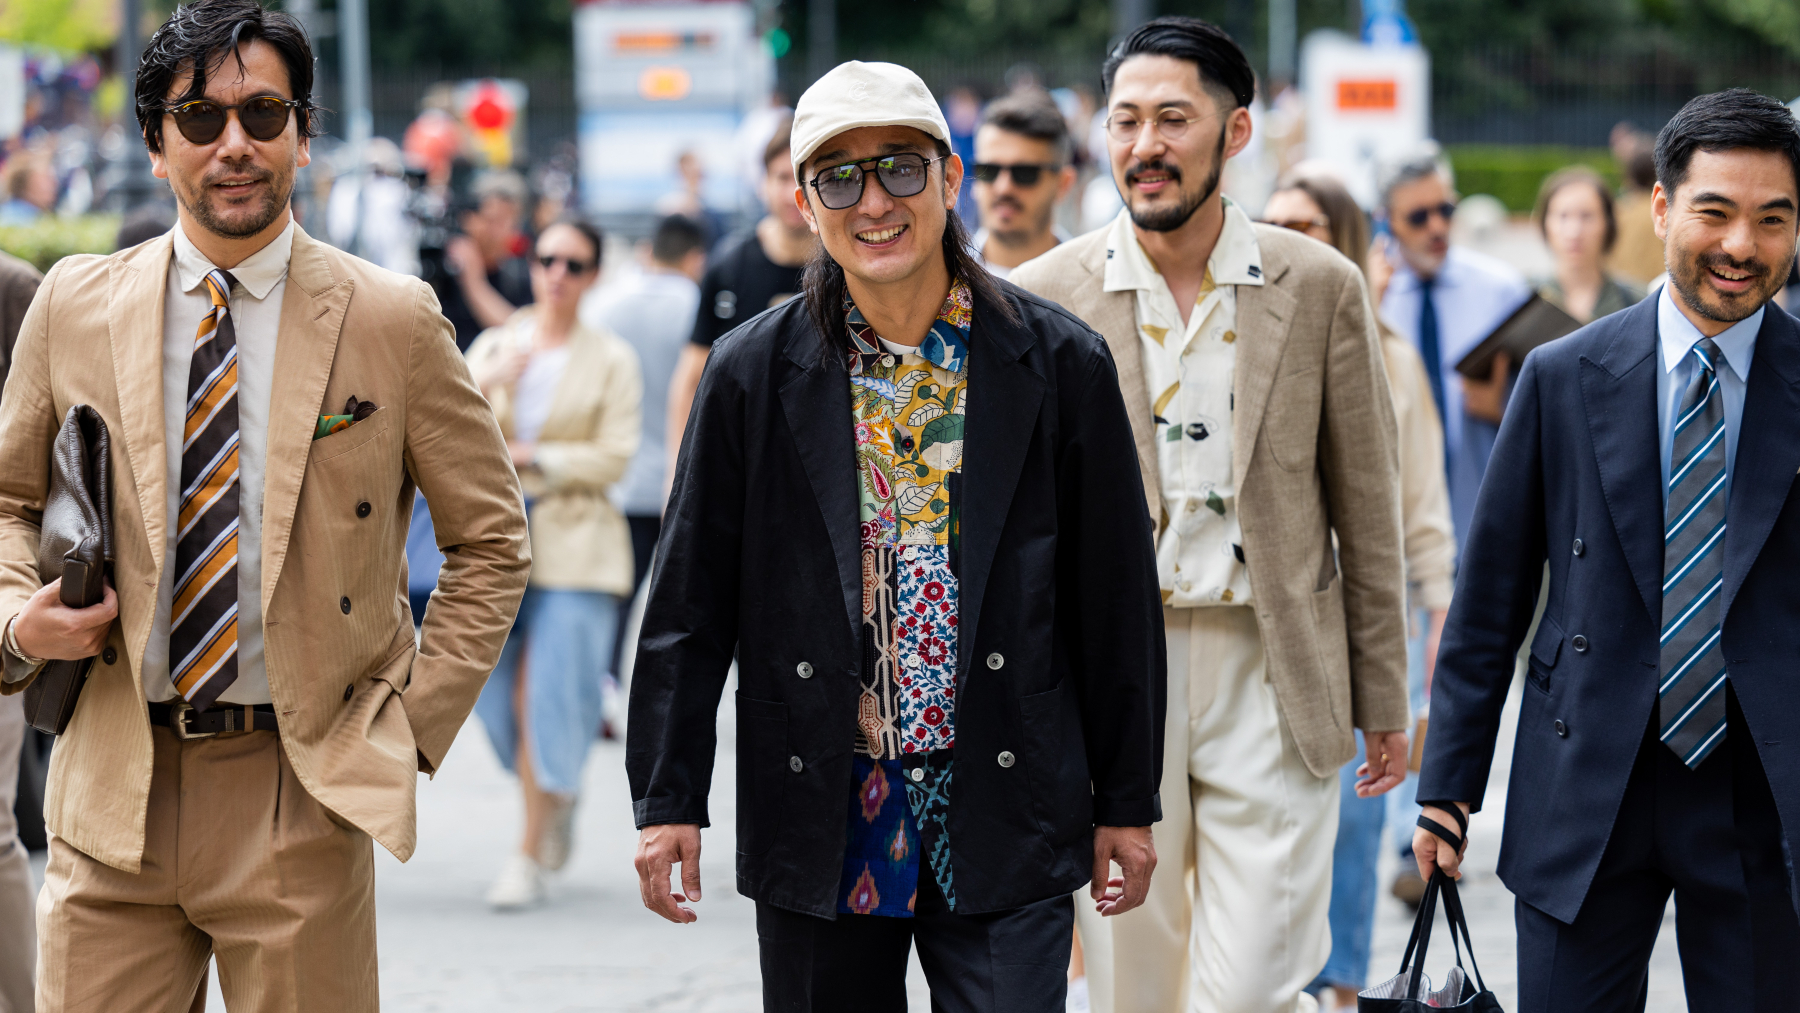 Menswear's New Groove: Casual Suiting Meets Gorpcore?